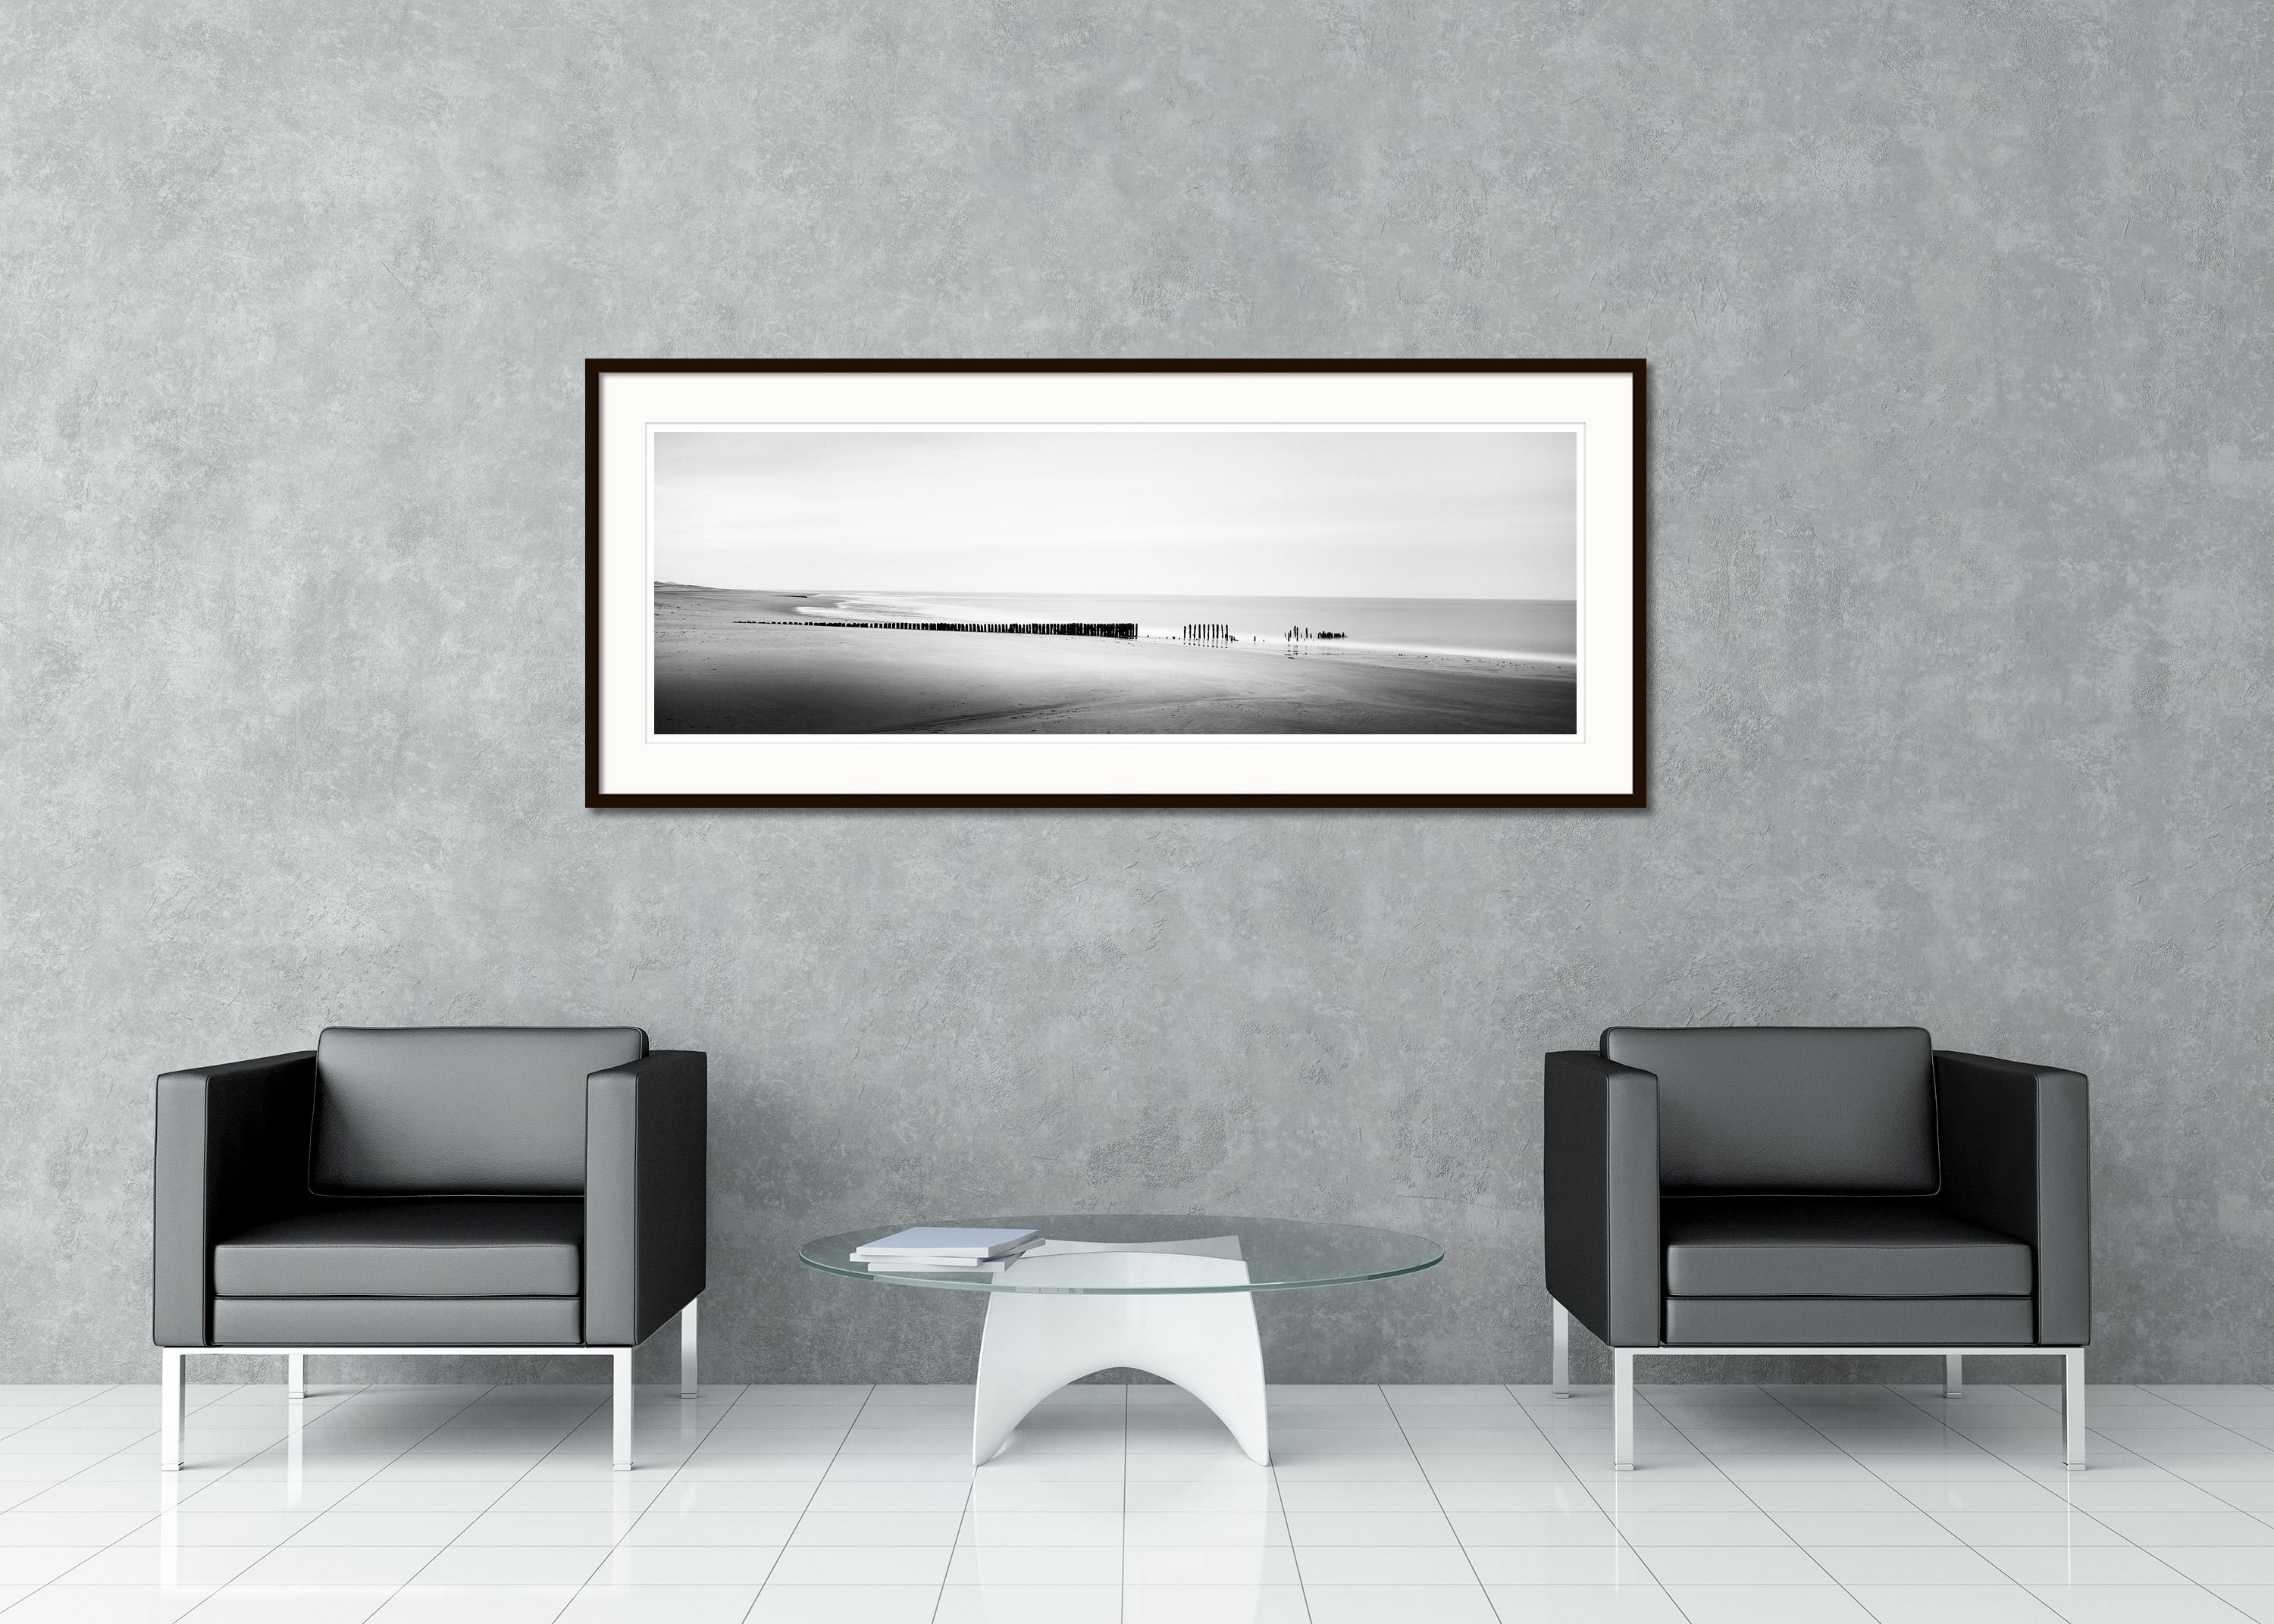 Gerald Berghammer - Limited edition of 9. 
Archival fine art pigment print. Printed to order and signed, titled, dated and numbered by artist. Certificate of authenticity included. Printed with 4cm white border.
15.75 x 47.24 in. / 40 x 120 cm -